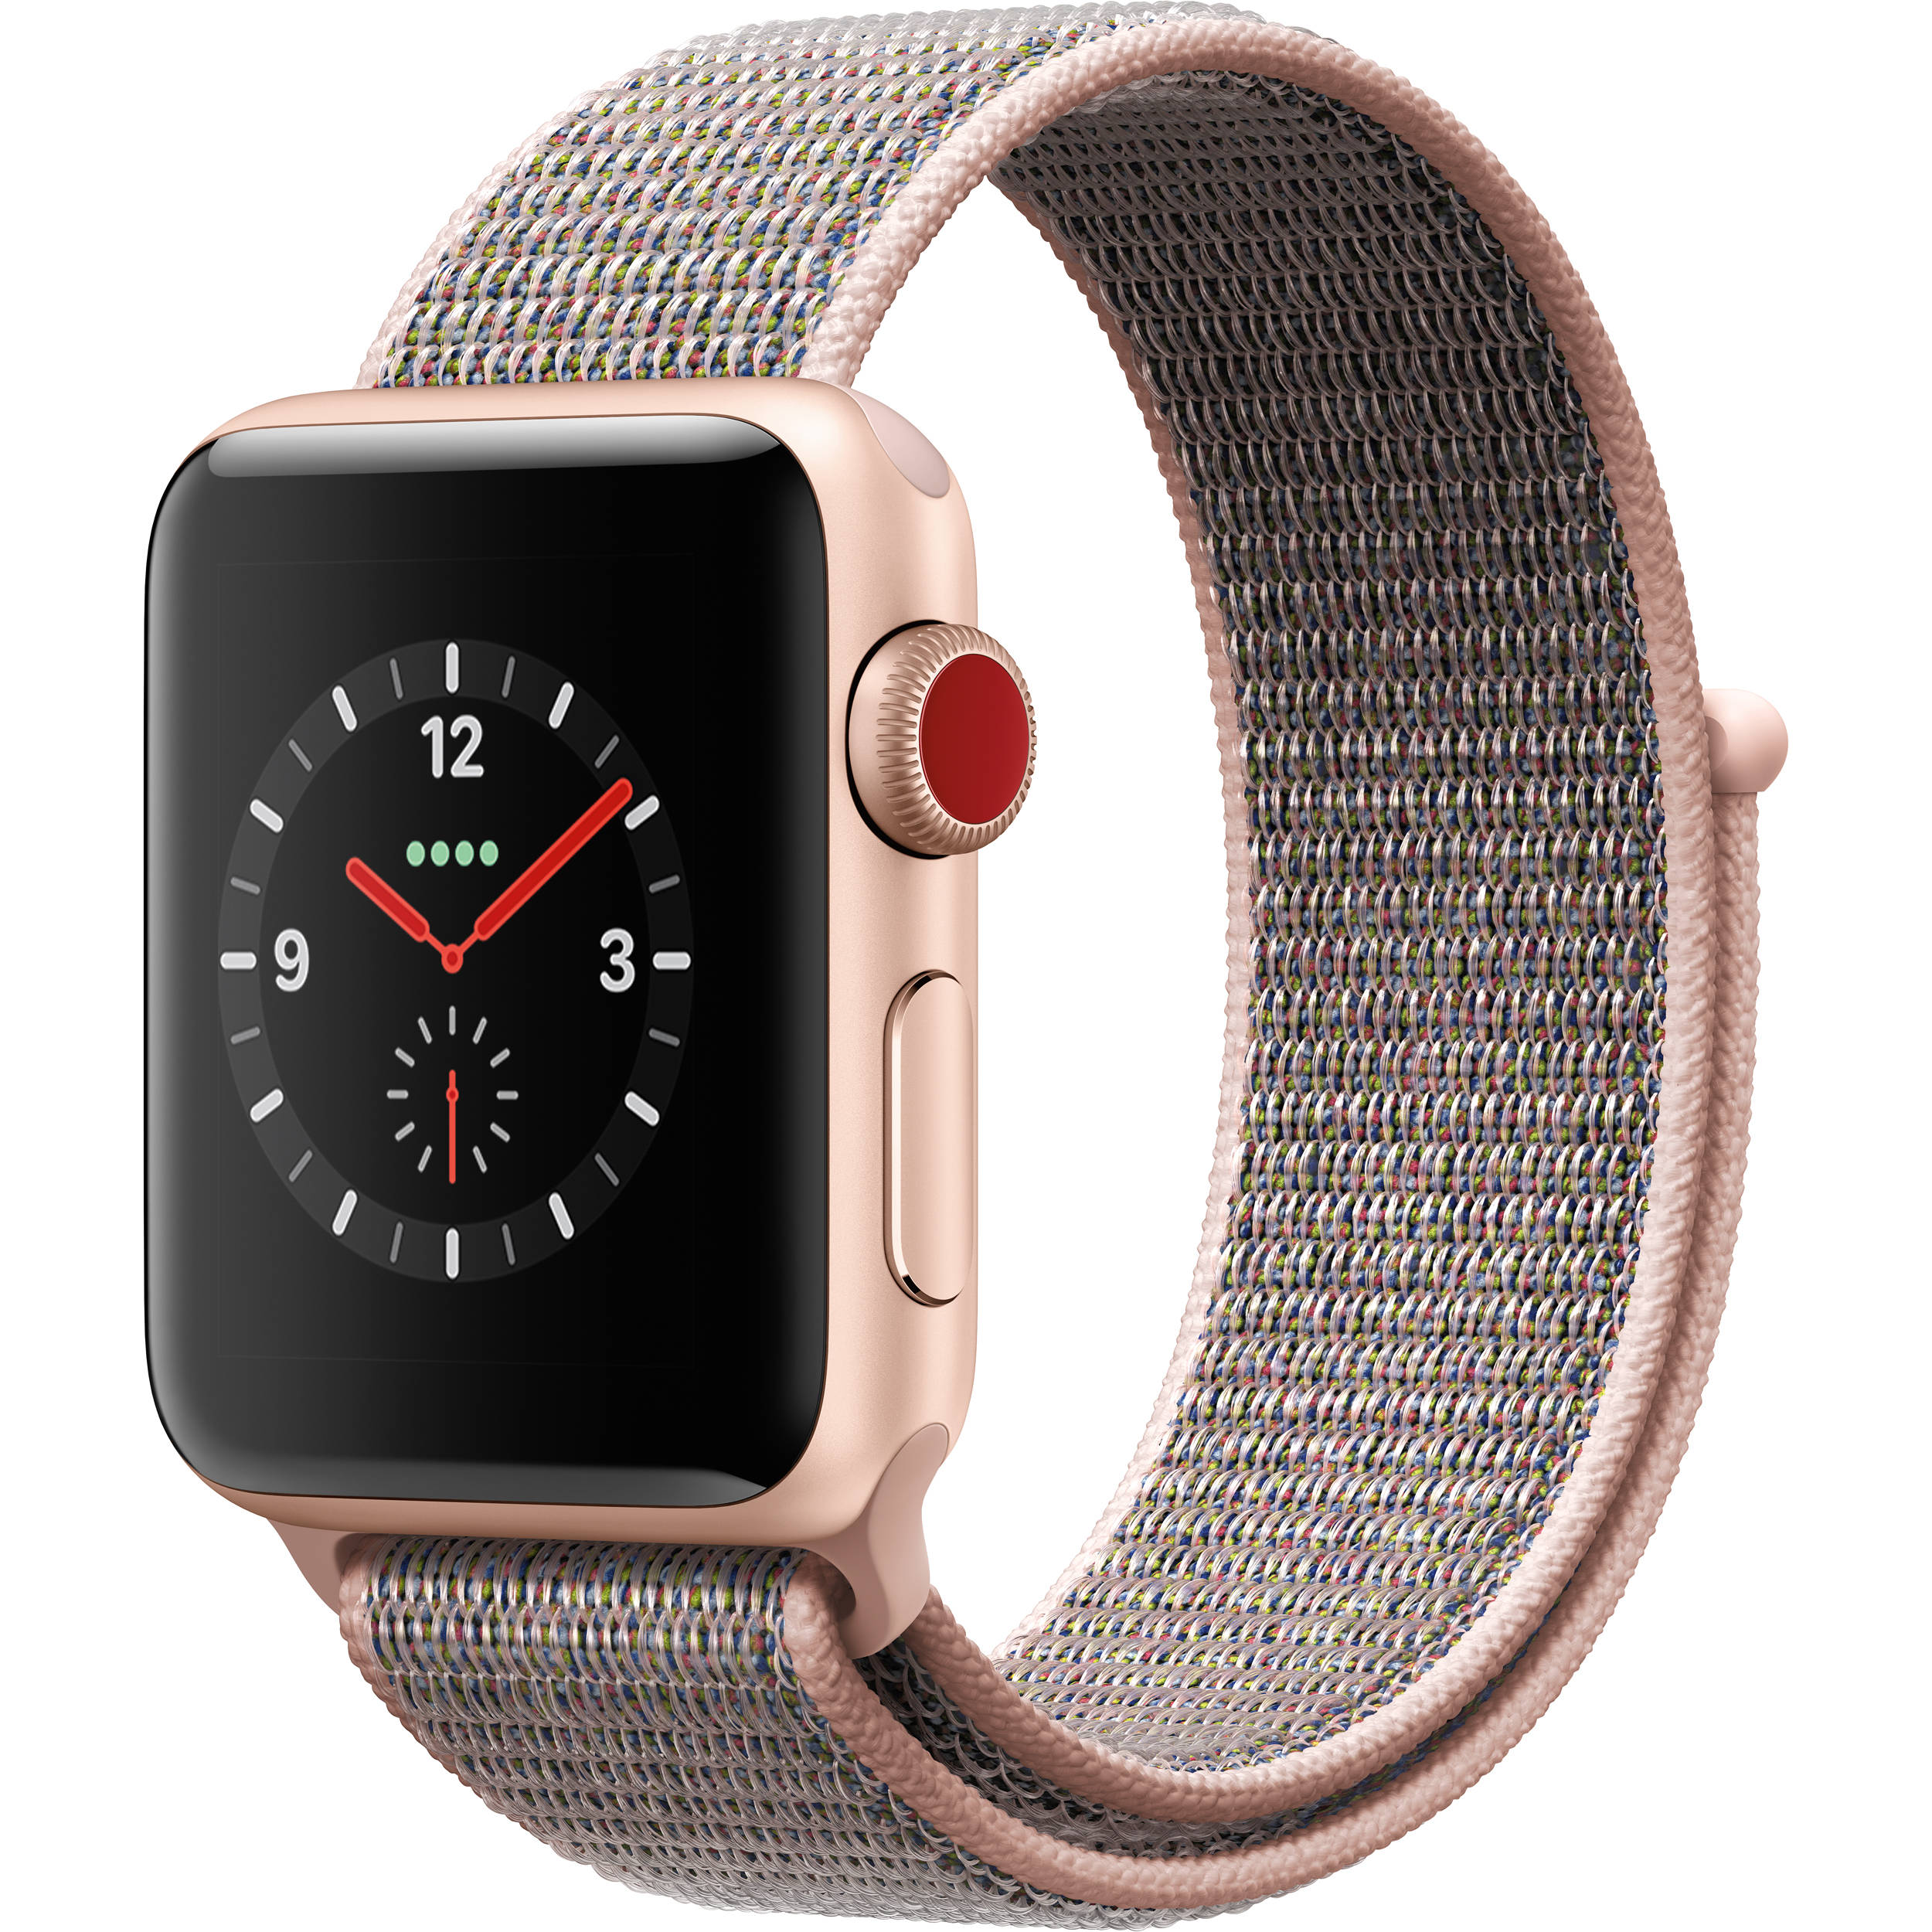 iwatch rose gold 38mm